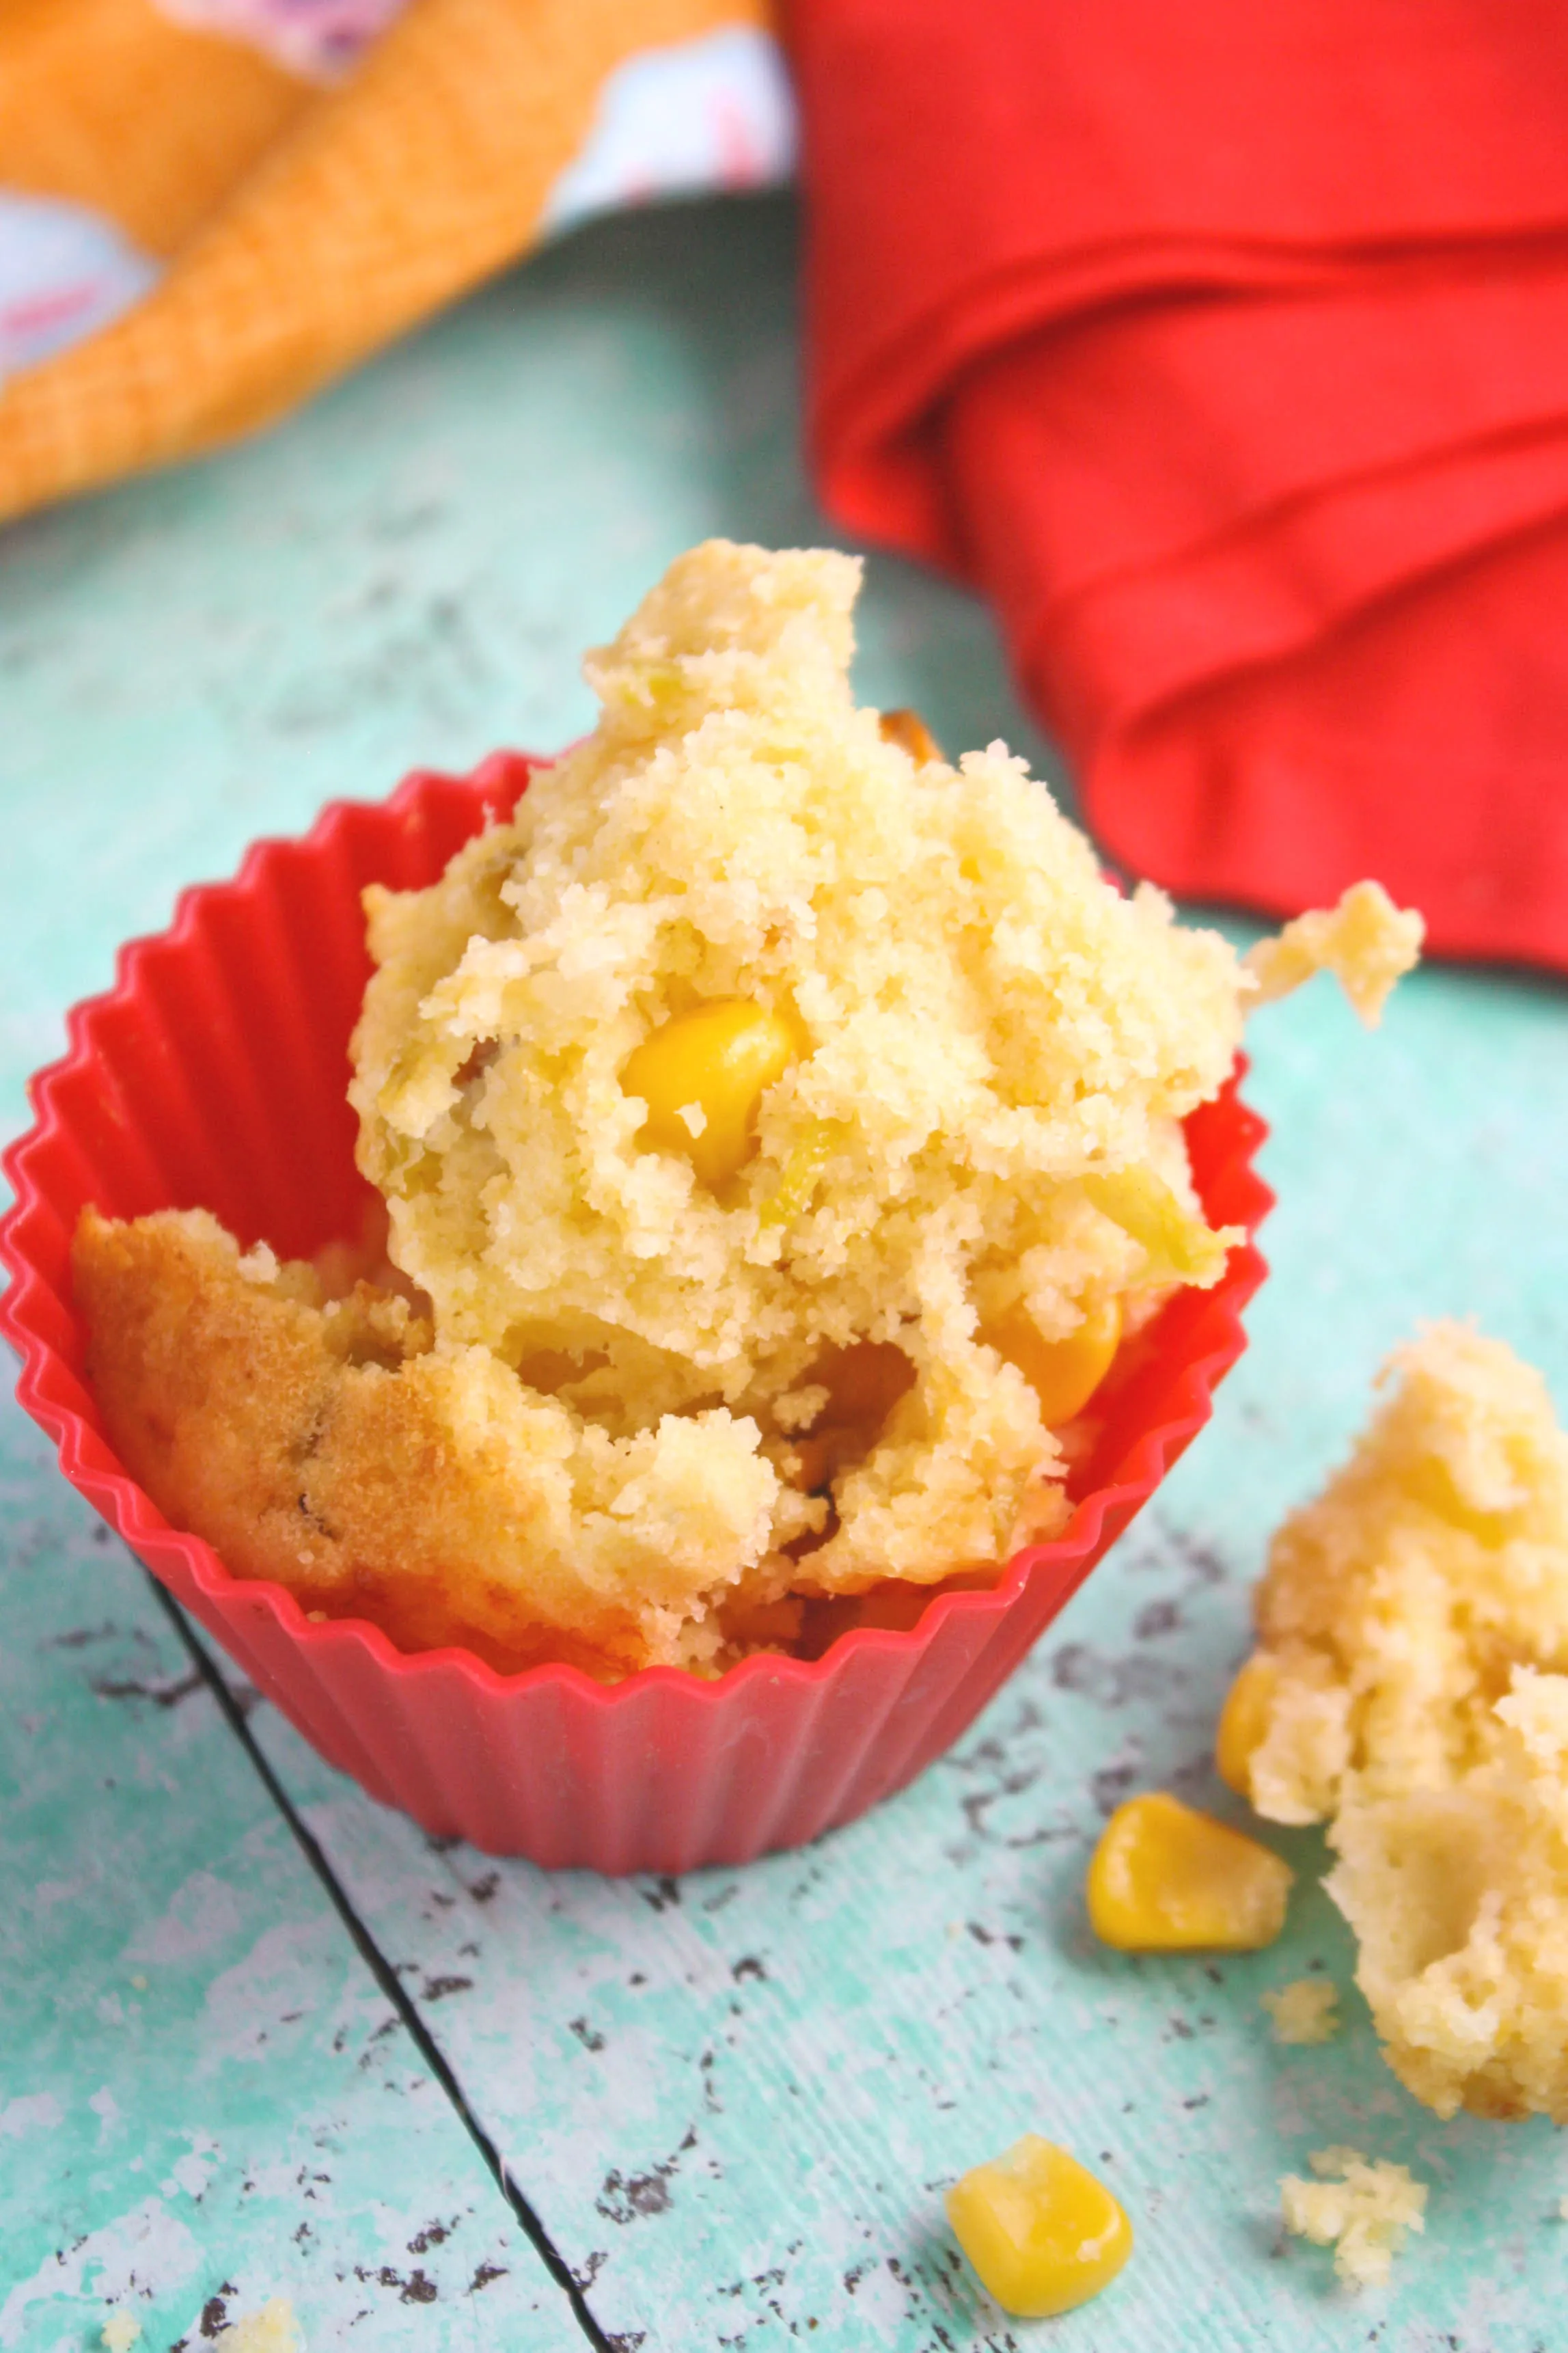 Roasted Green Chile Cornbread Muffins are a tasty treat to serve any time. You'll love the big flavors!